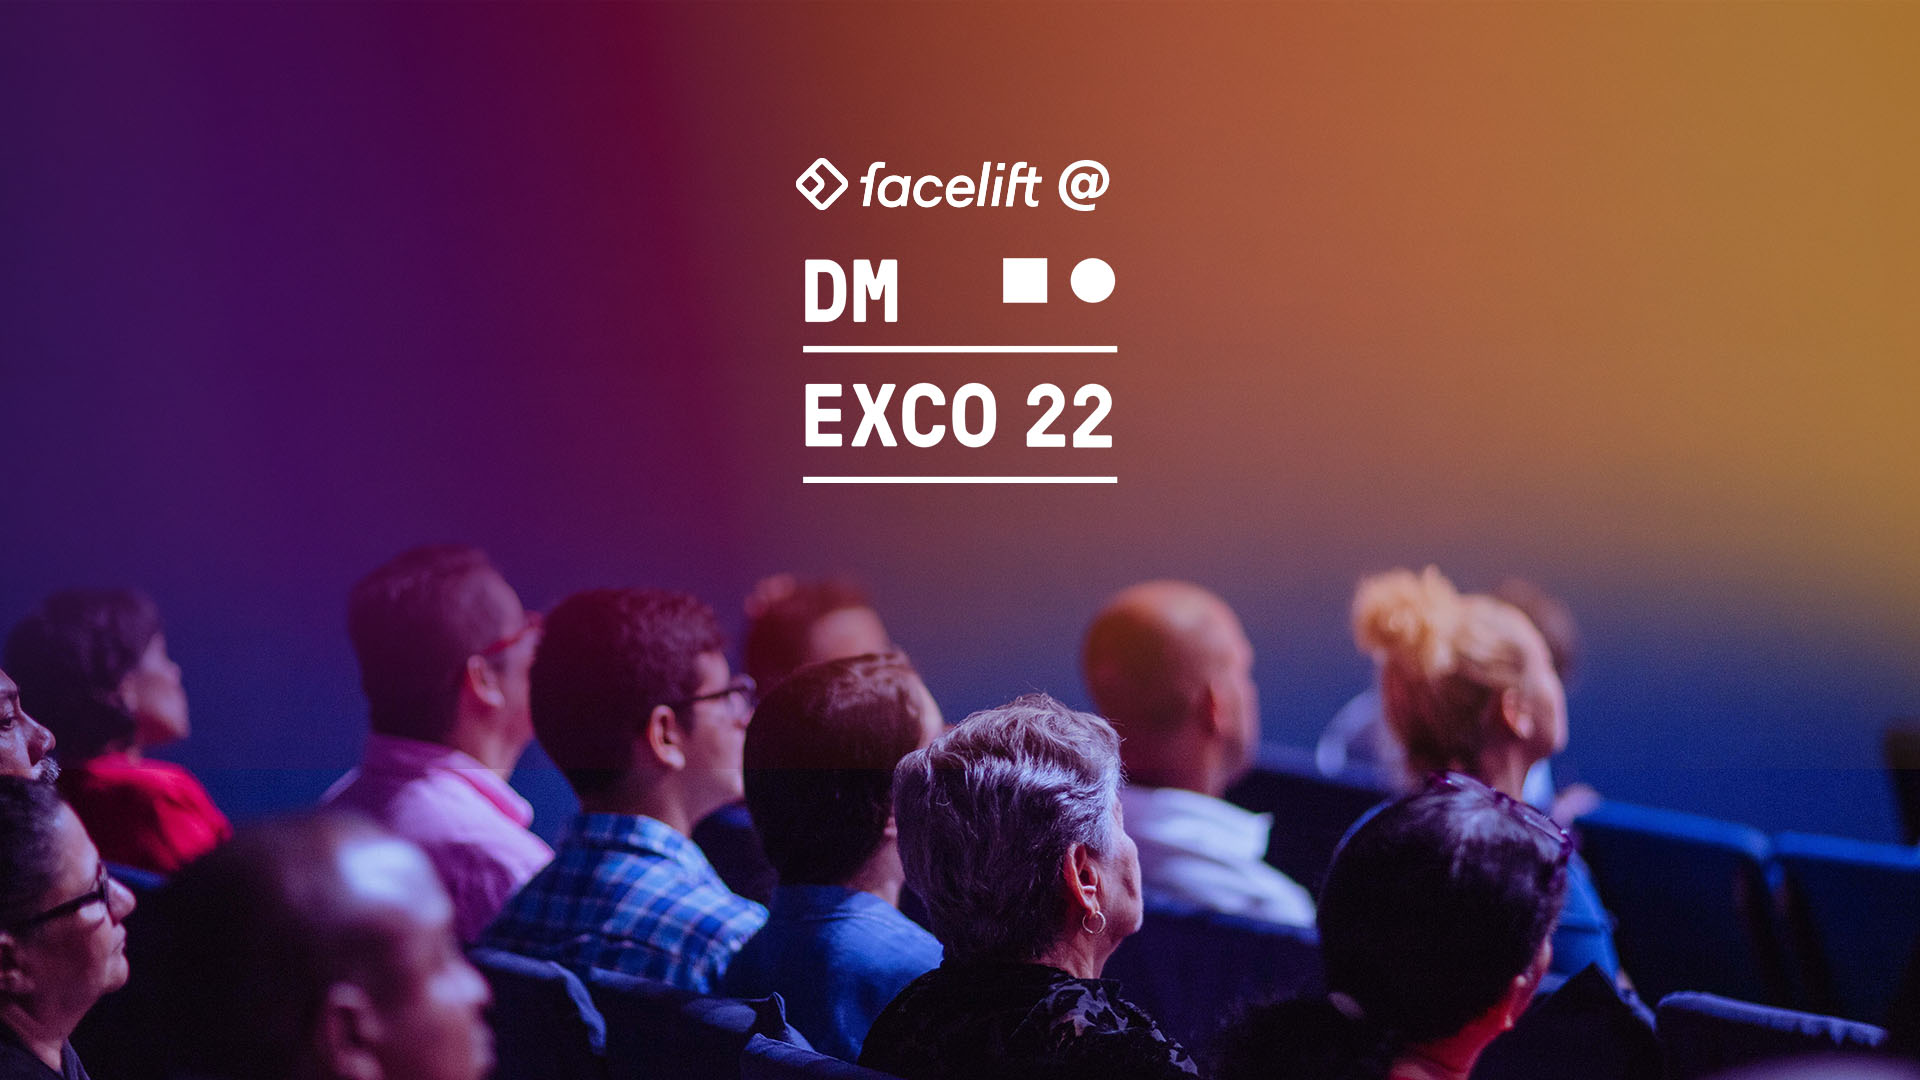 facelift Will Be At DMEXCO 2022!